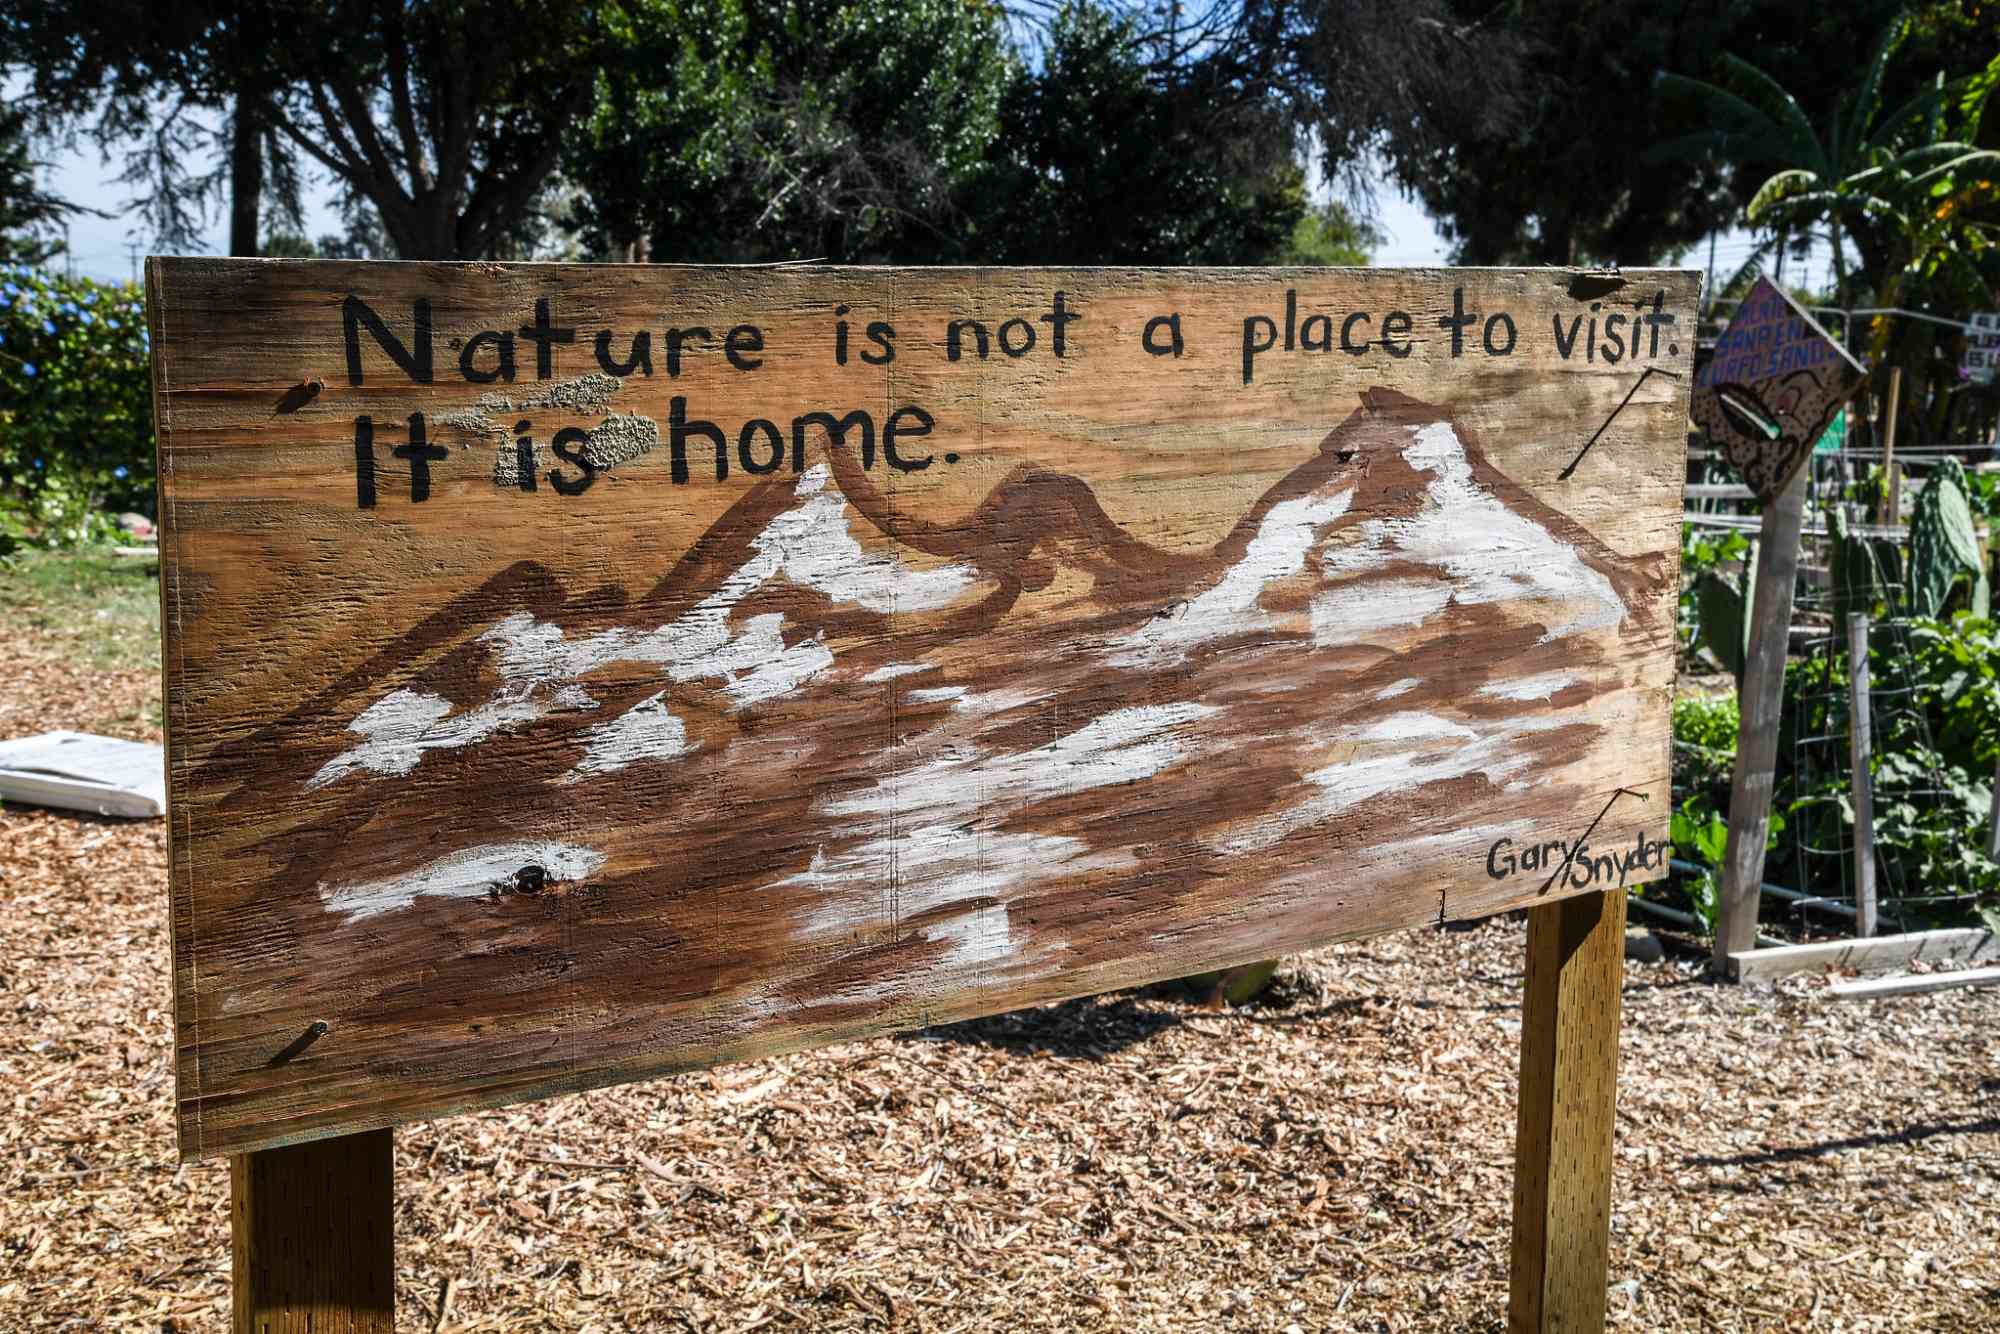 A painting by Siu Luna and Gary Snyder's quote "Nature is not a place to visit. It is home." stands in the community garden plots Ontario, California